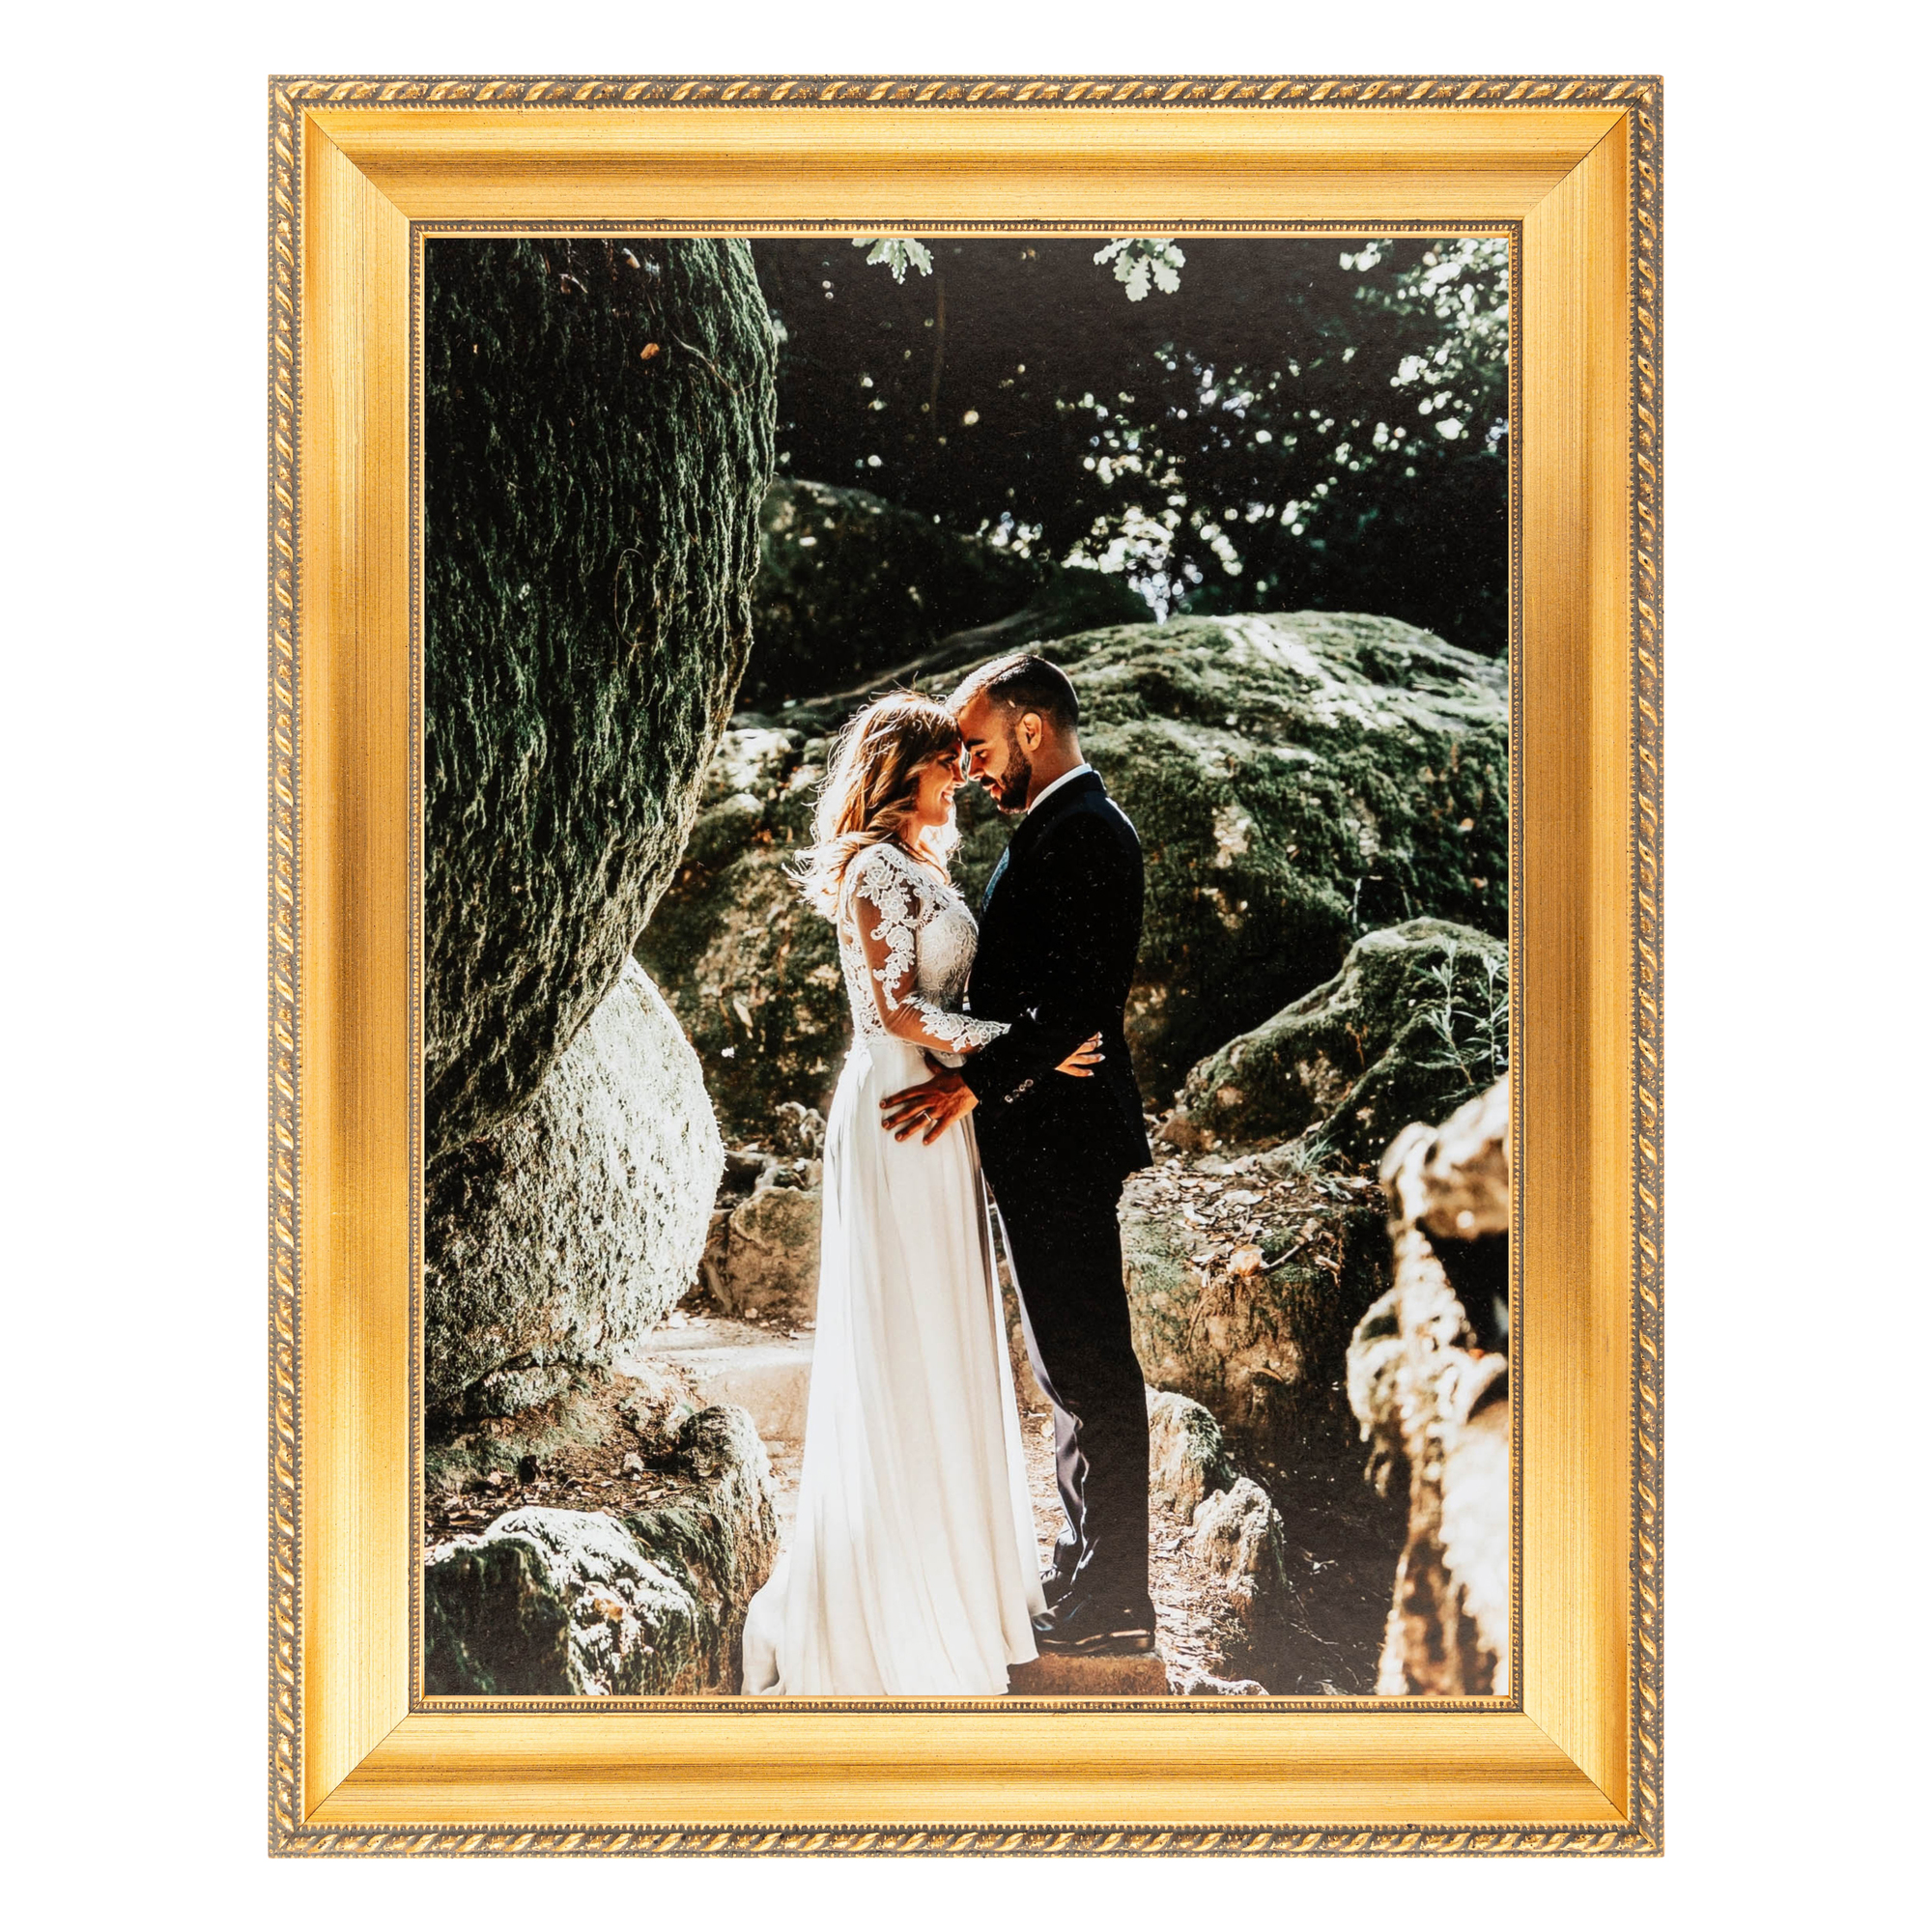 ArtToFrames 16x24 inch Gold Picture Frame, This Gold Wood Poster Frame Is Great for Your Art or Photos, Comes with 060 Plexi Glass (4624), Size: 16 x